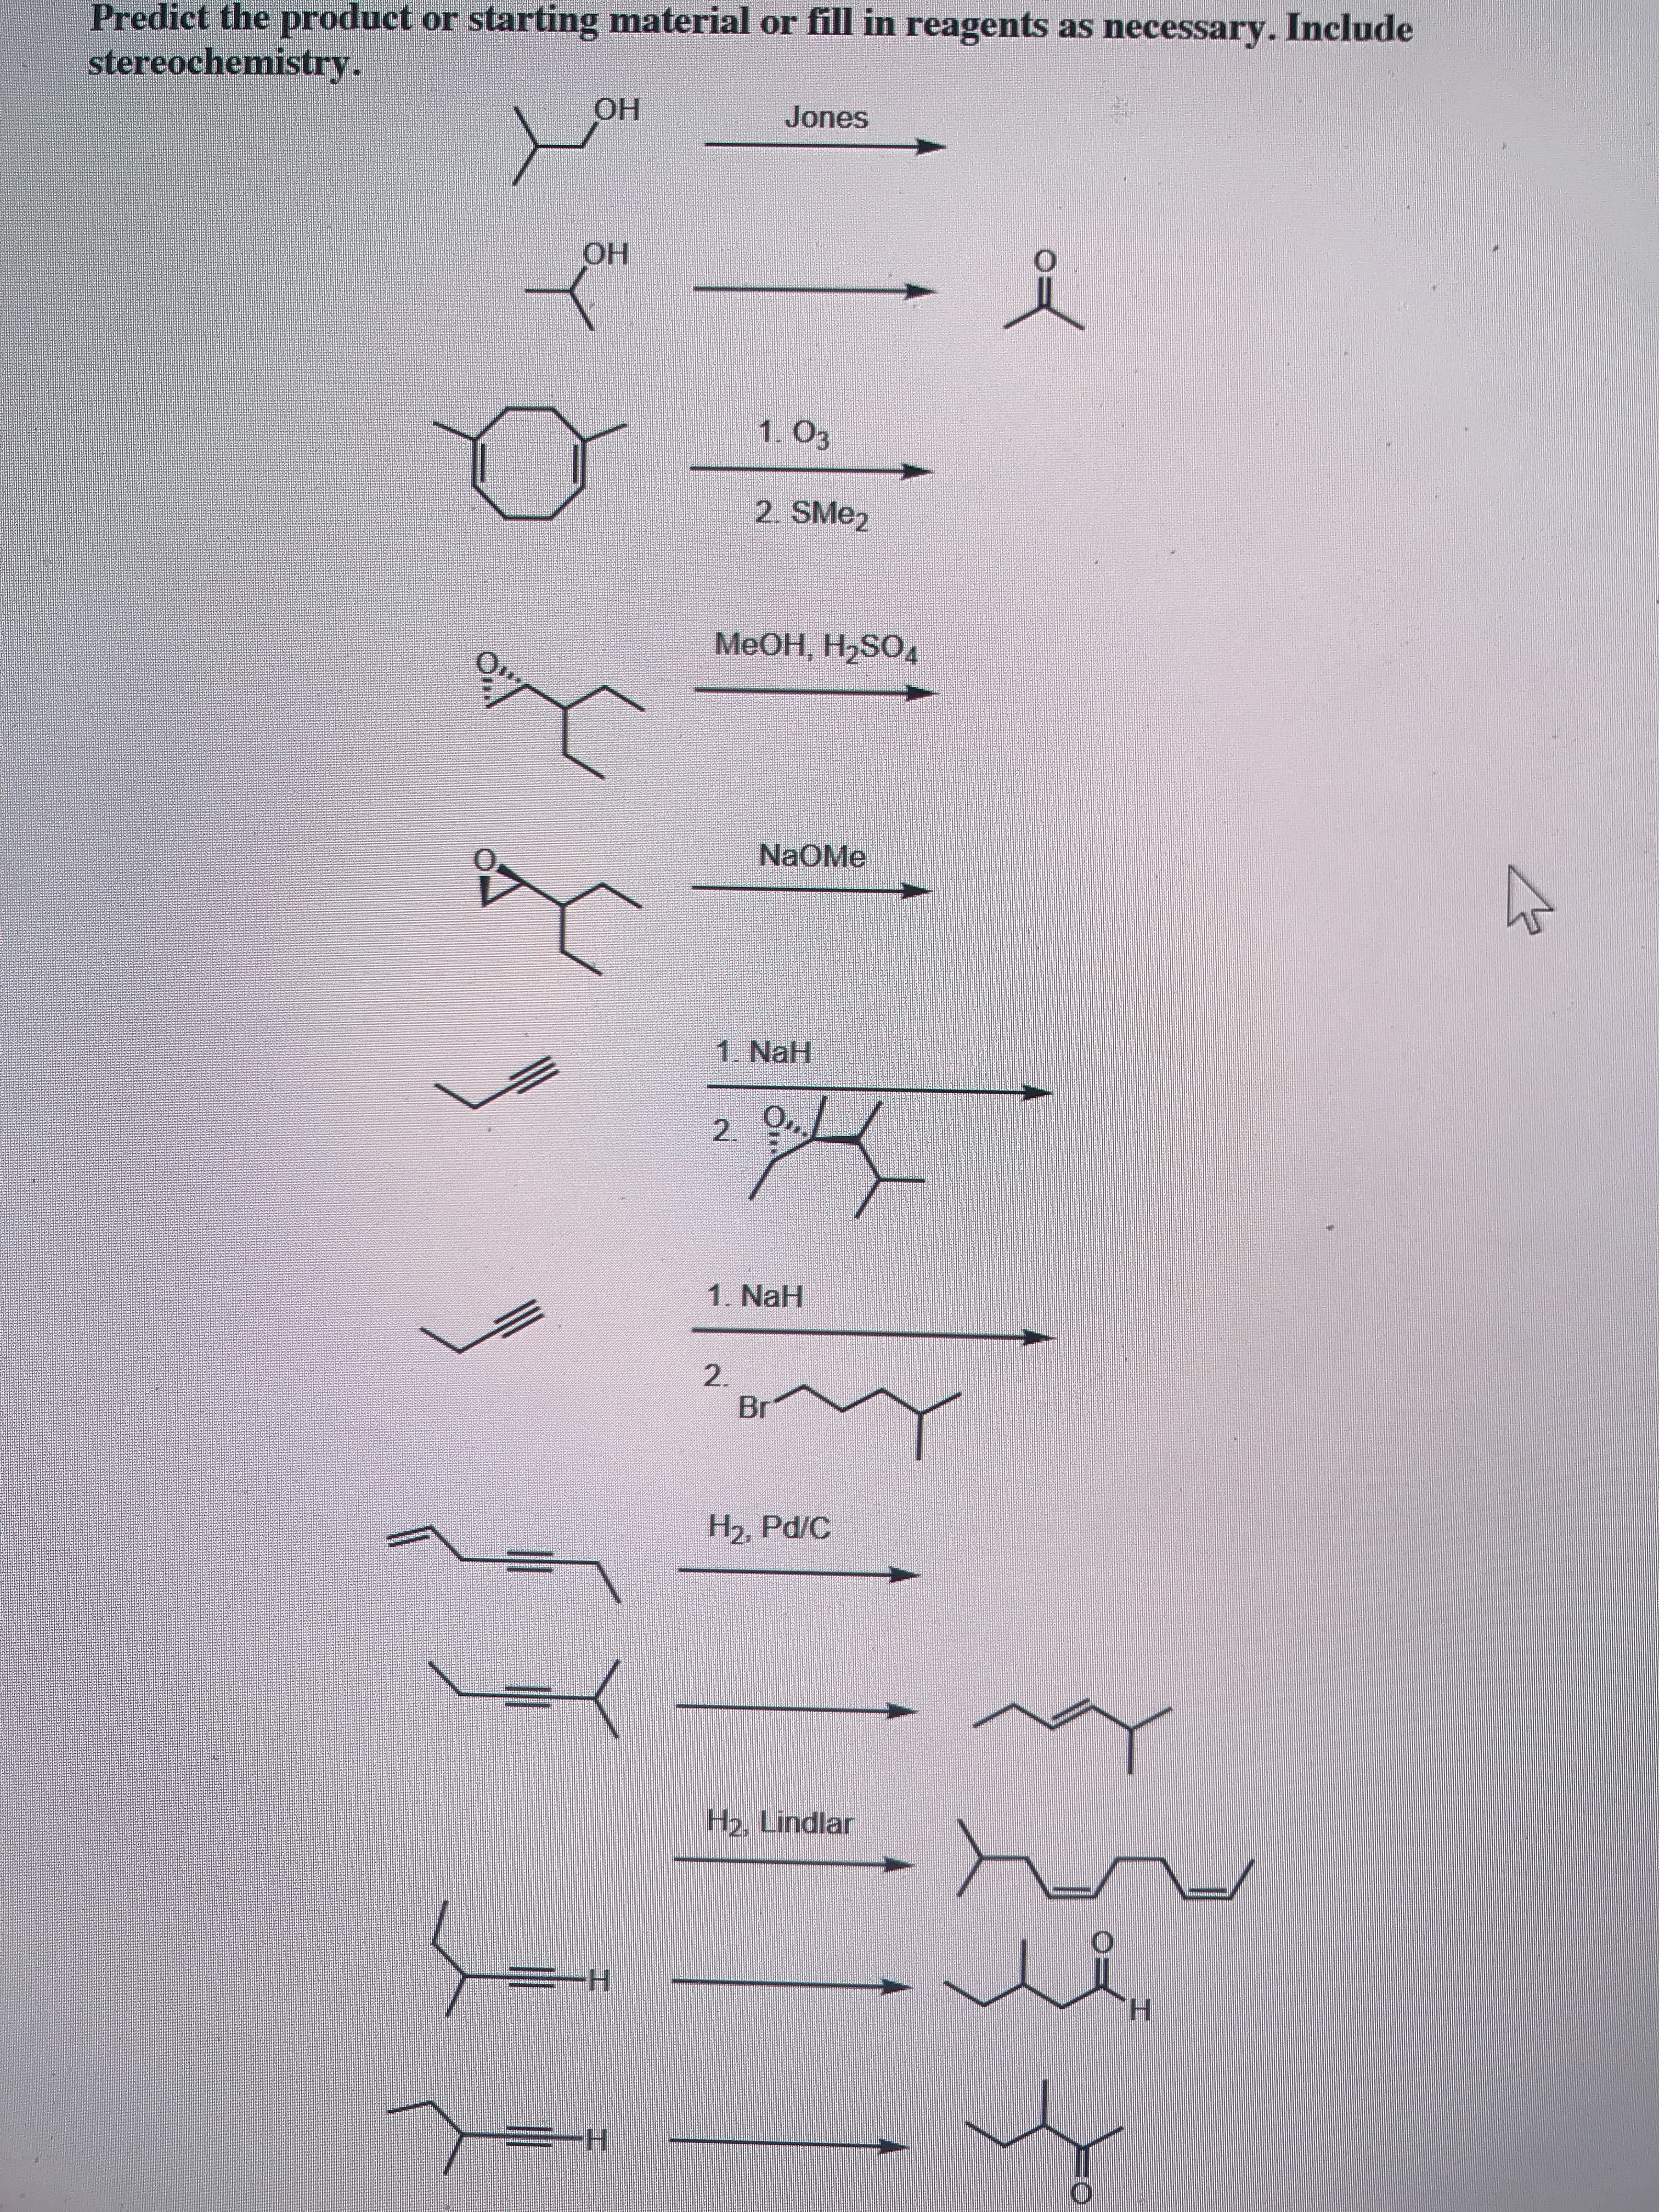 Predict the product or starting material or fill in reagents as necessary. Include
stereochemistry.
ОН
Jones
OH
1. 03
2. SME2
МeОН, Н-SO4
NaOMe
1. NaH
2.
1. NaH
2.
Br
H2, Pd/C
H2, Lindlar
-Н
H.
Н
